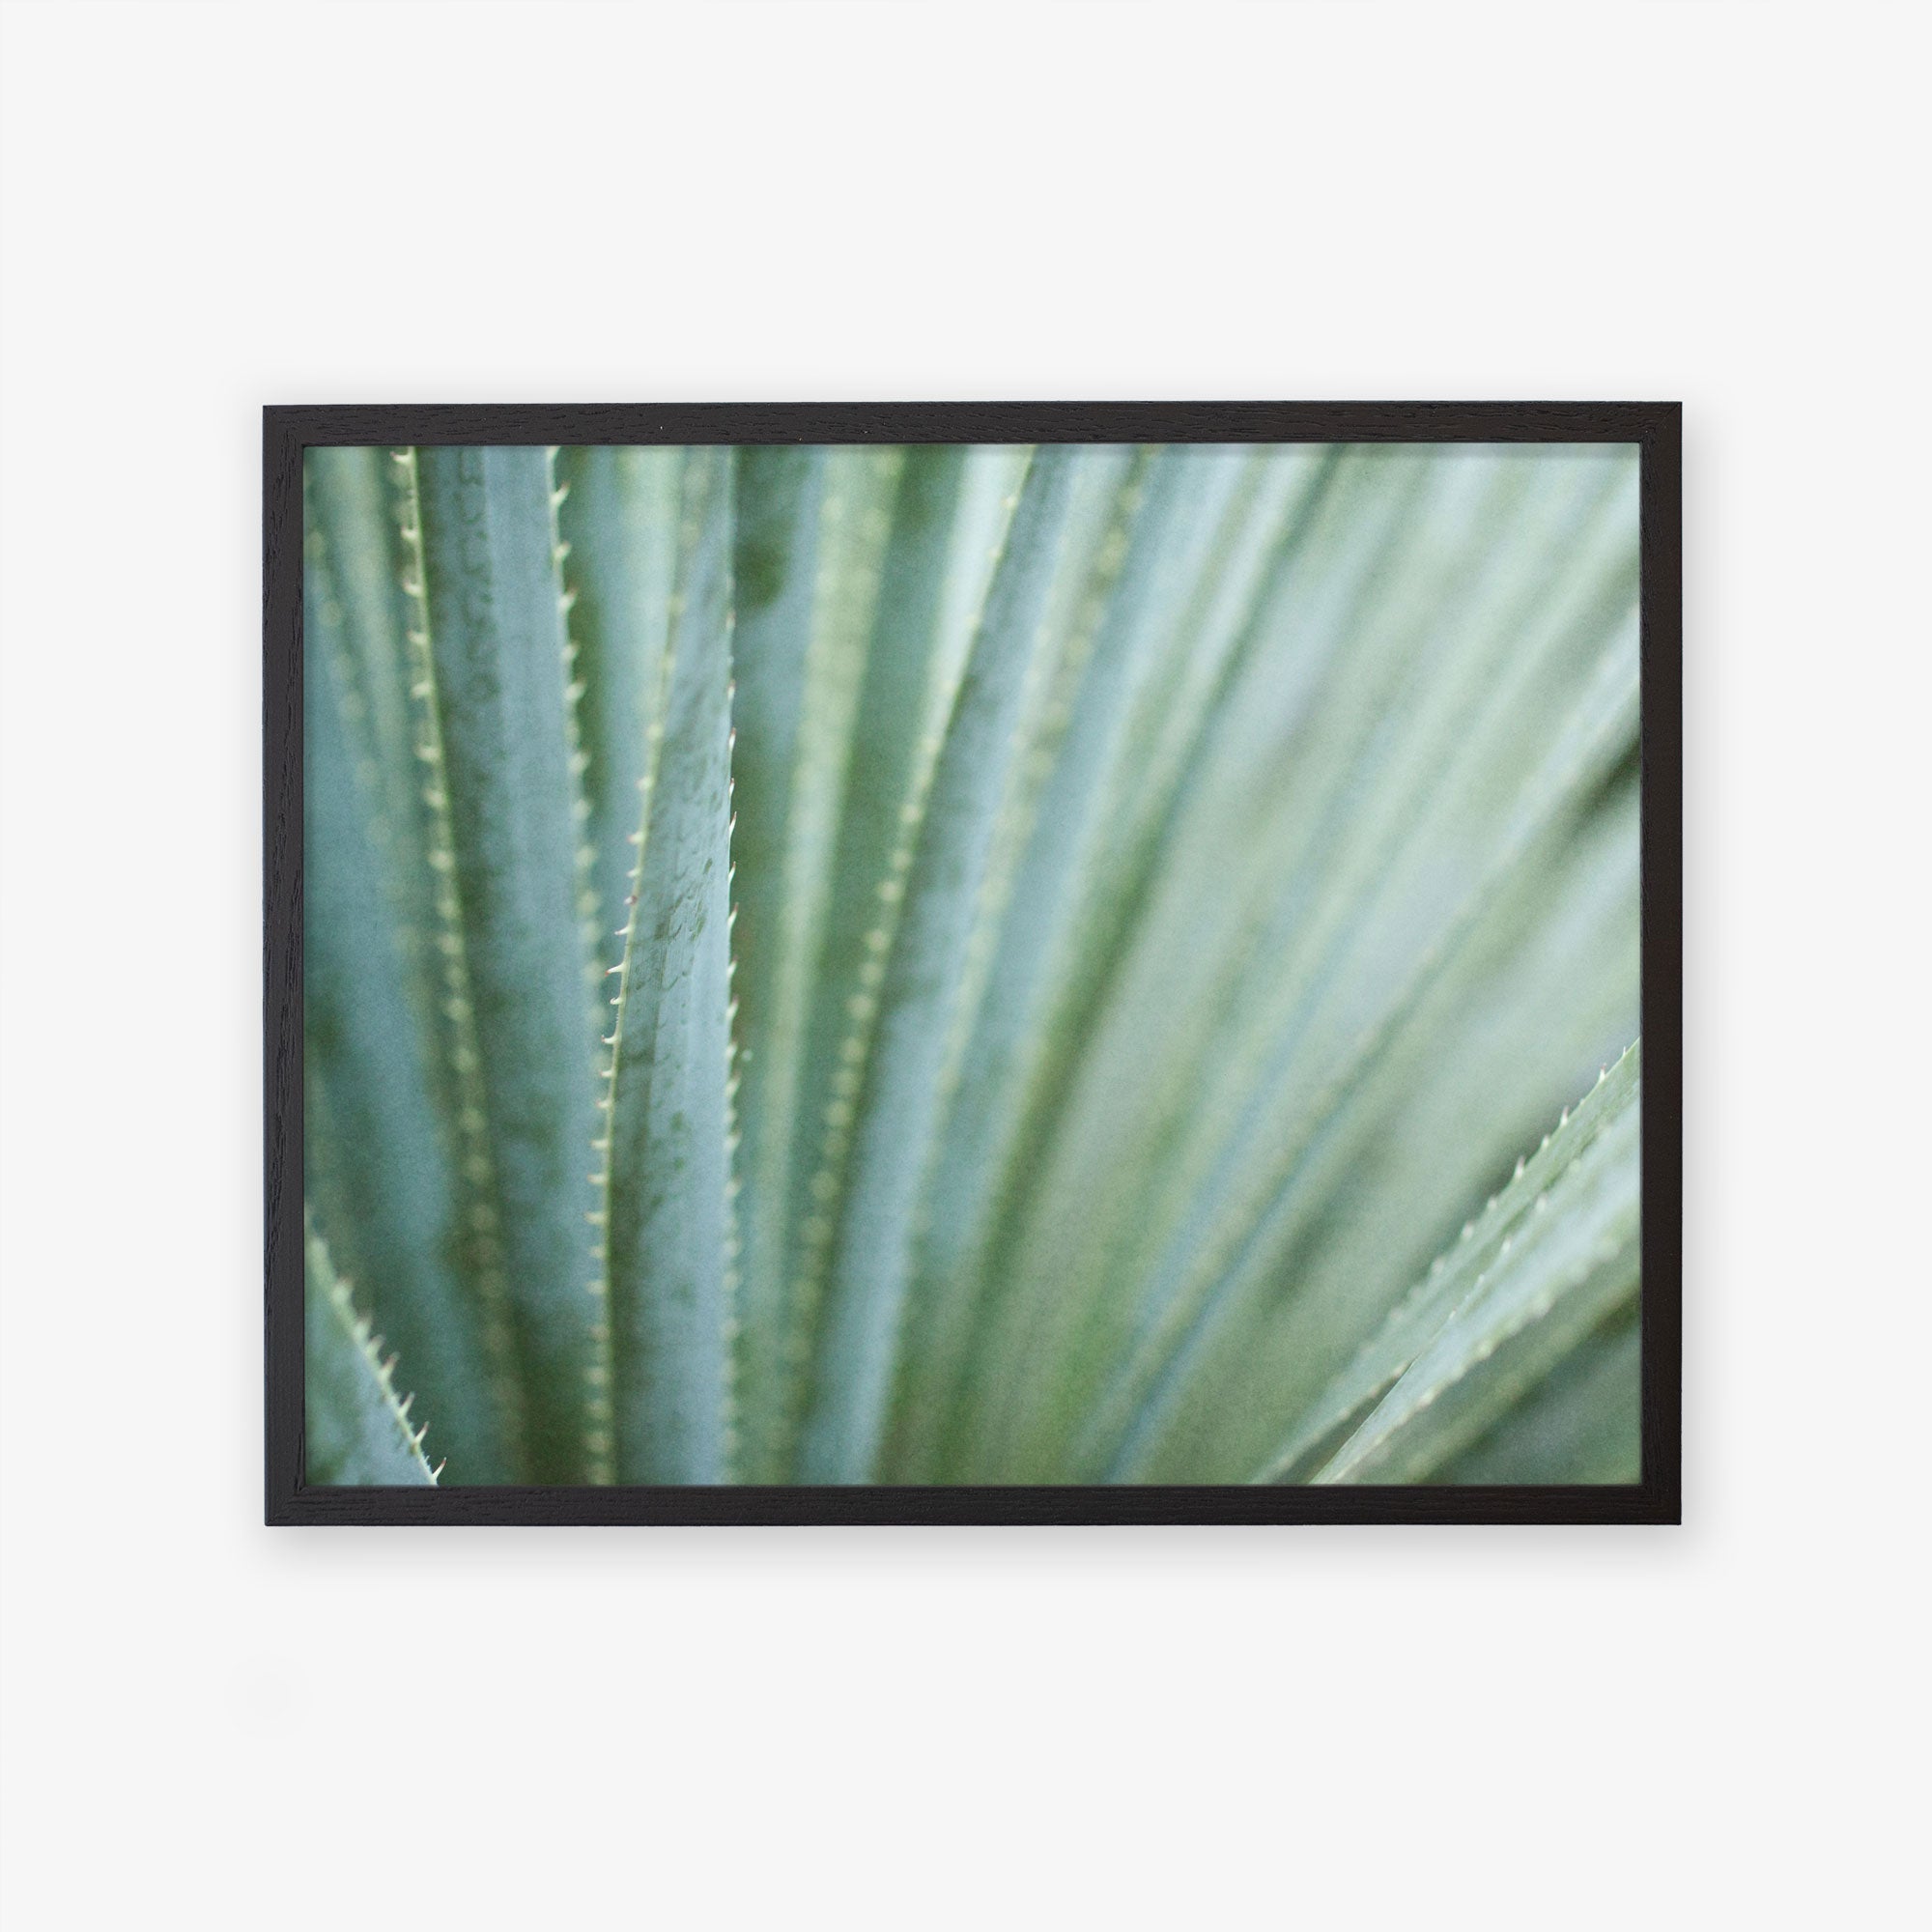 A framed photograph of an Abstract Green Botanical Print, &#39;Strands and Spikes&#39; by Offley Green, hanging on a white wall. The focus is sharp on the pattern of the leaves, printed on archival photographic.